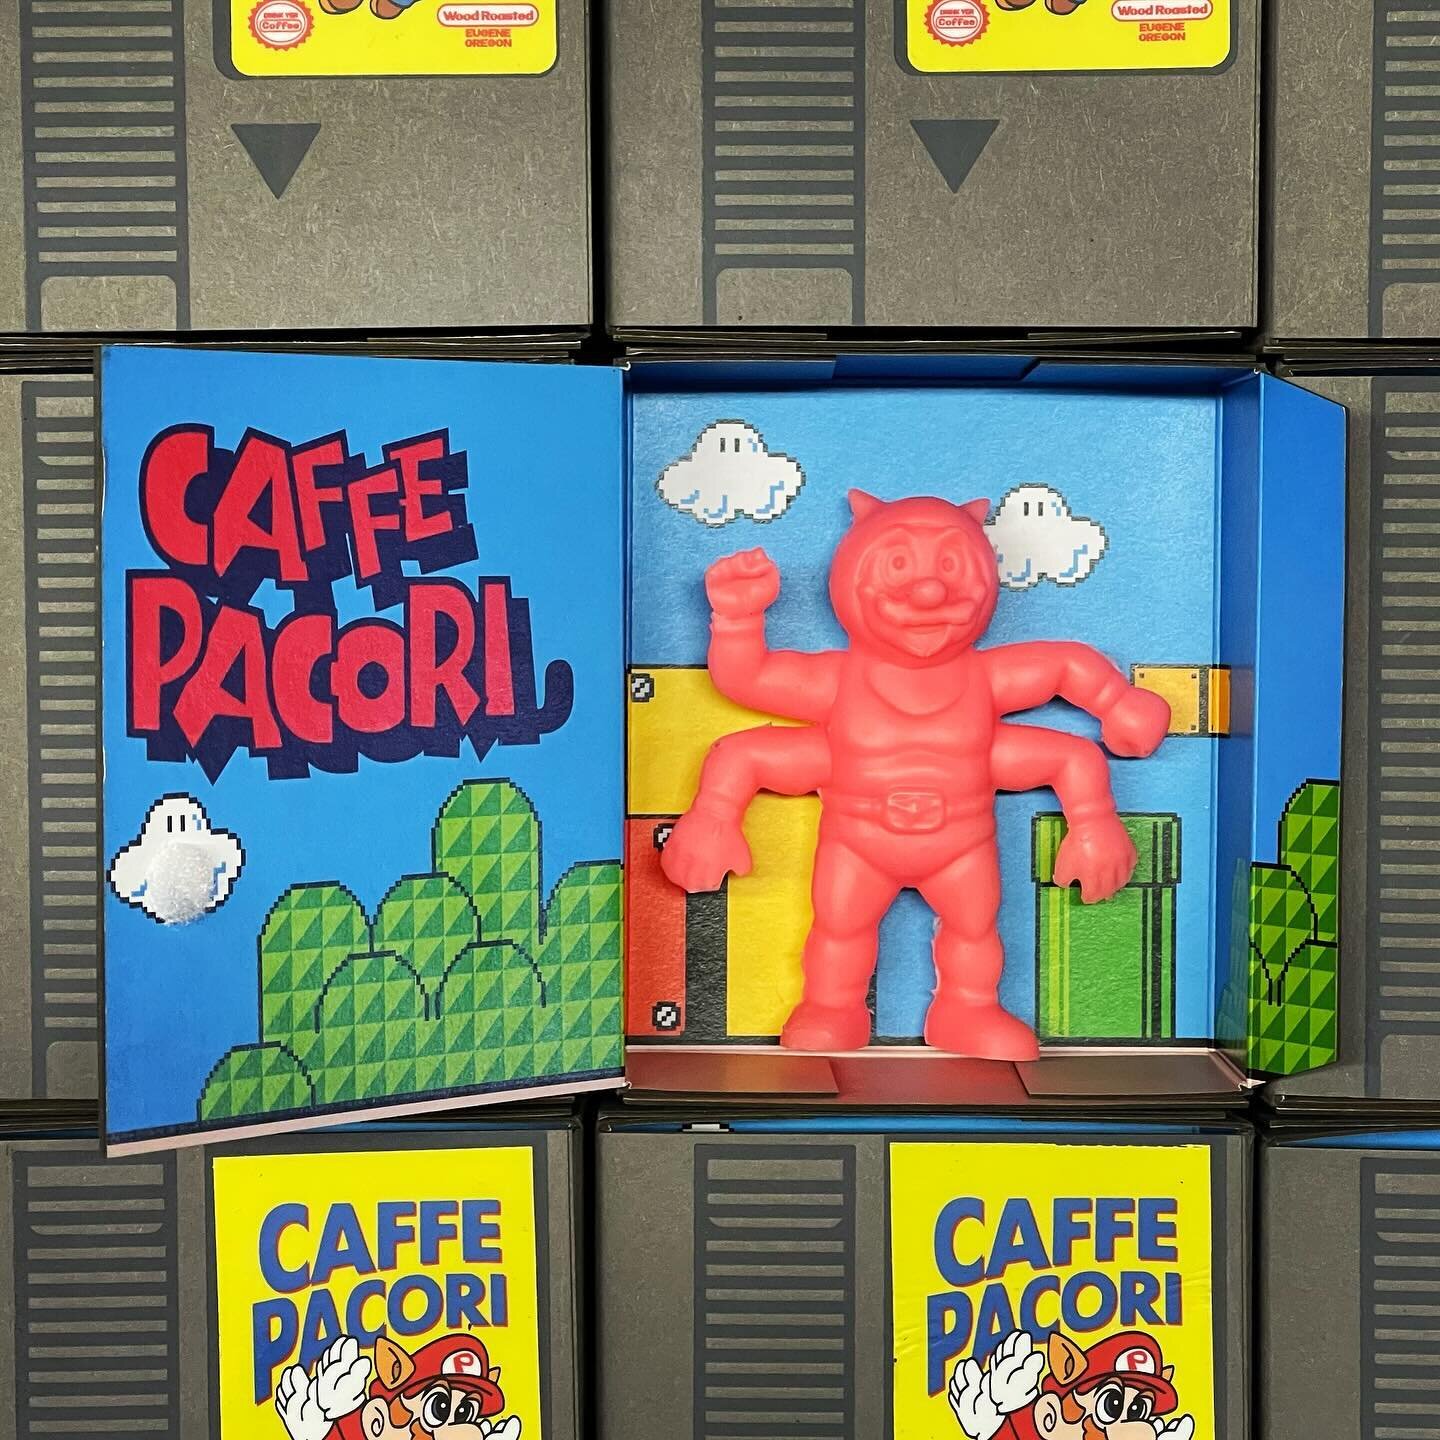 One week from today, Team Pacori is proud to present, Deka Barista. Available at the Pacori Store and on our website March 10th. 
.
Toy design by @donner.pete 
Graphics by @pacific_rose_design 
Box design by @twinravenspress 
Stickers by @rockinstick